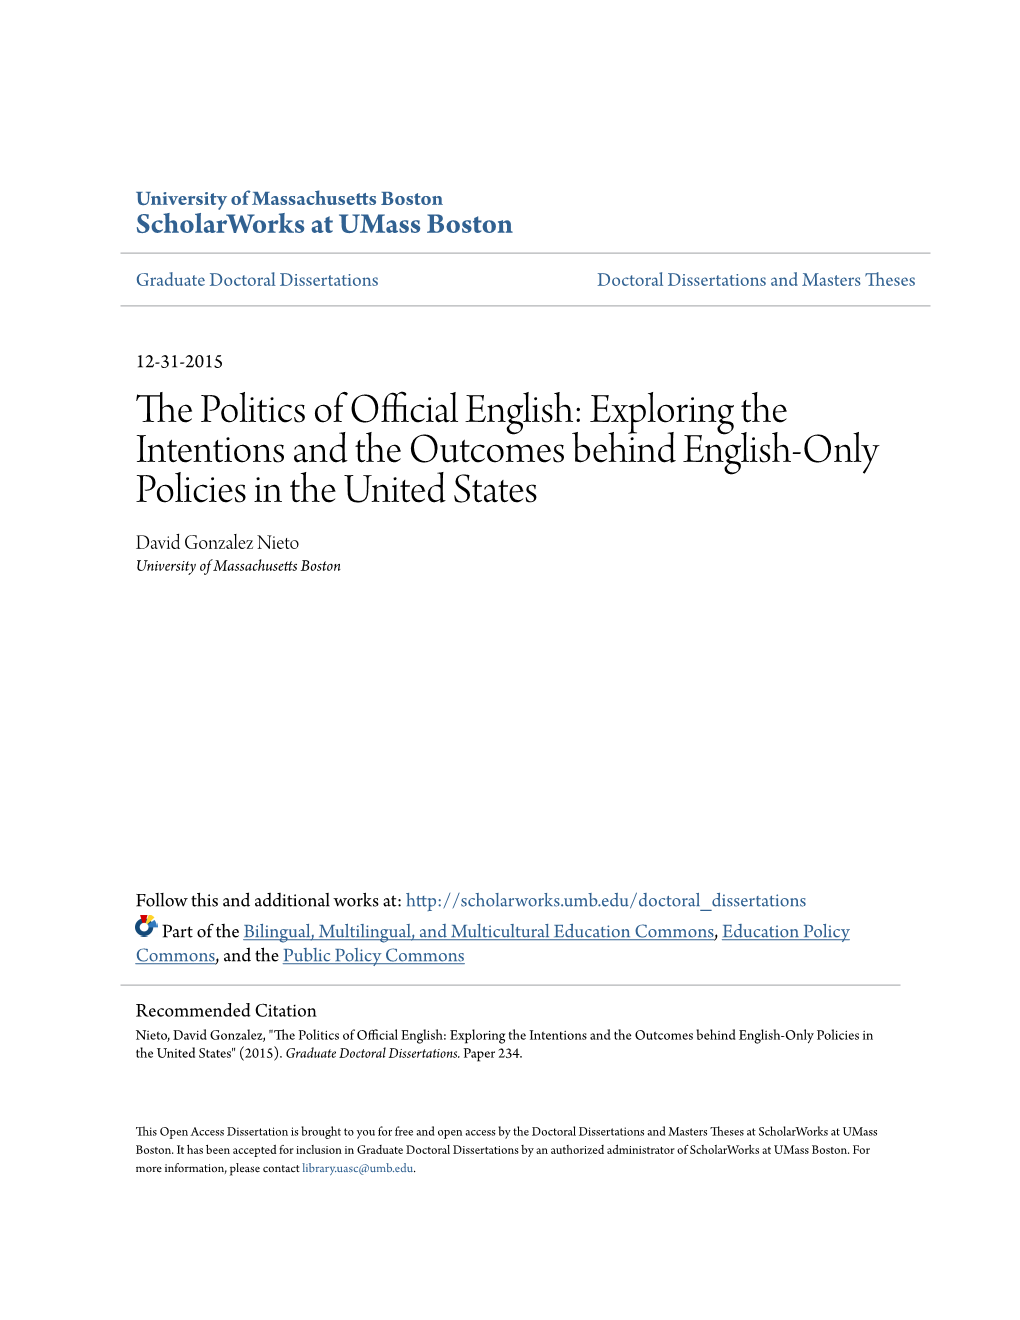 The Politics of Official English